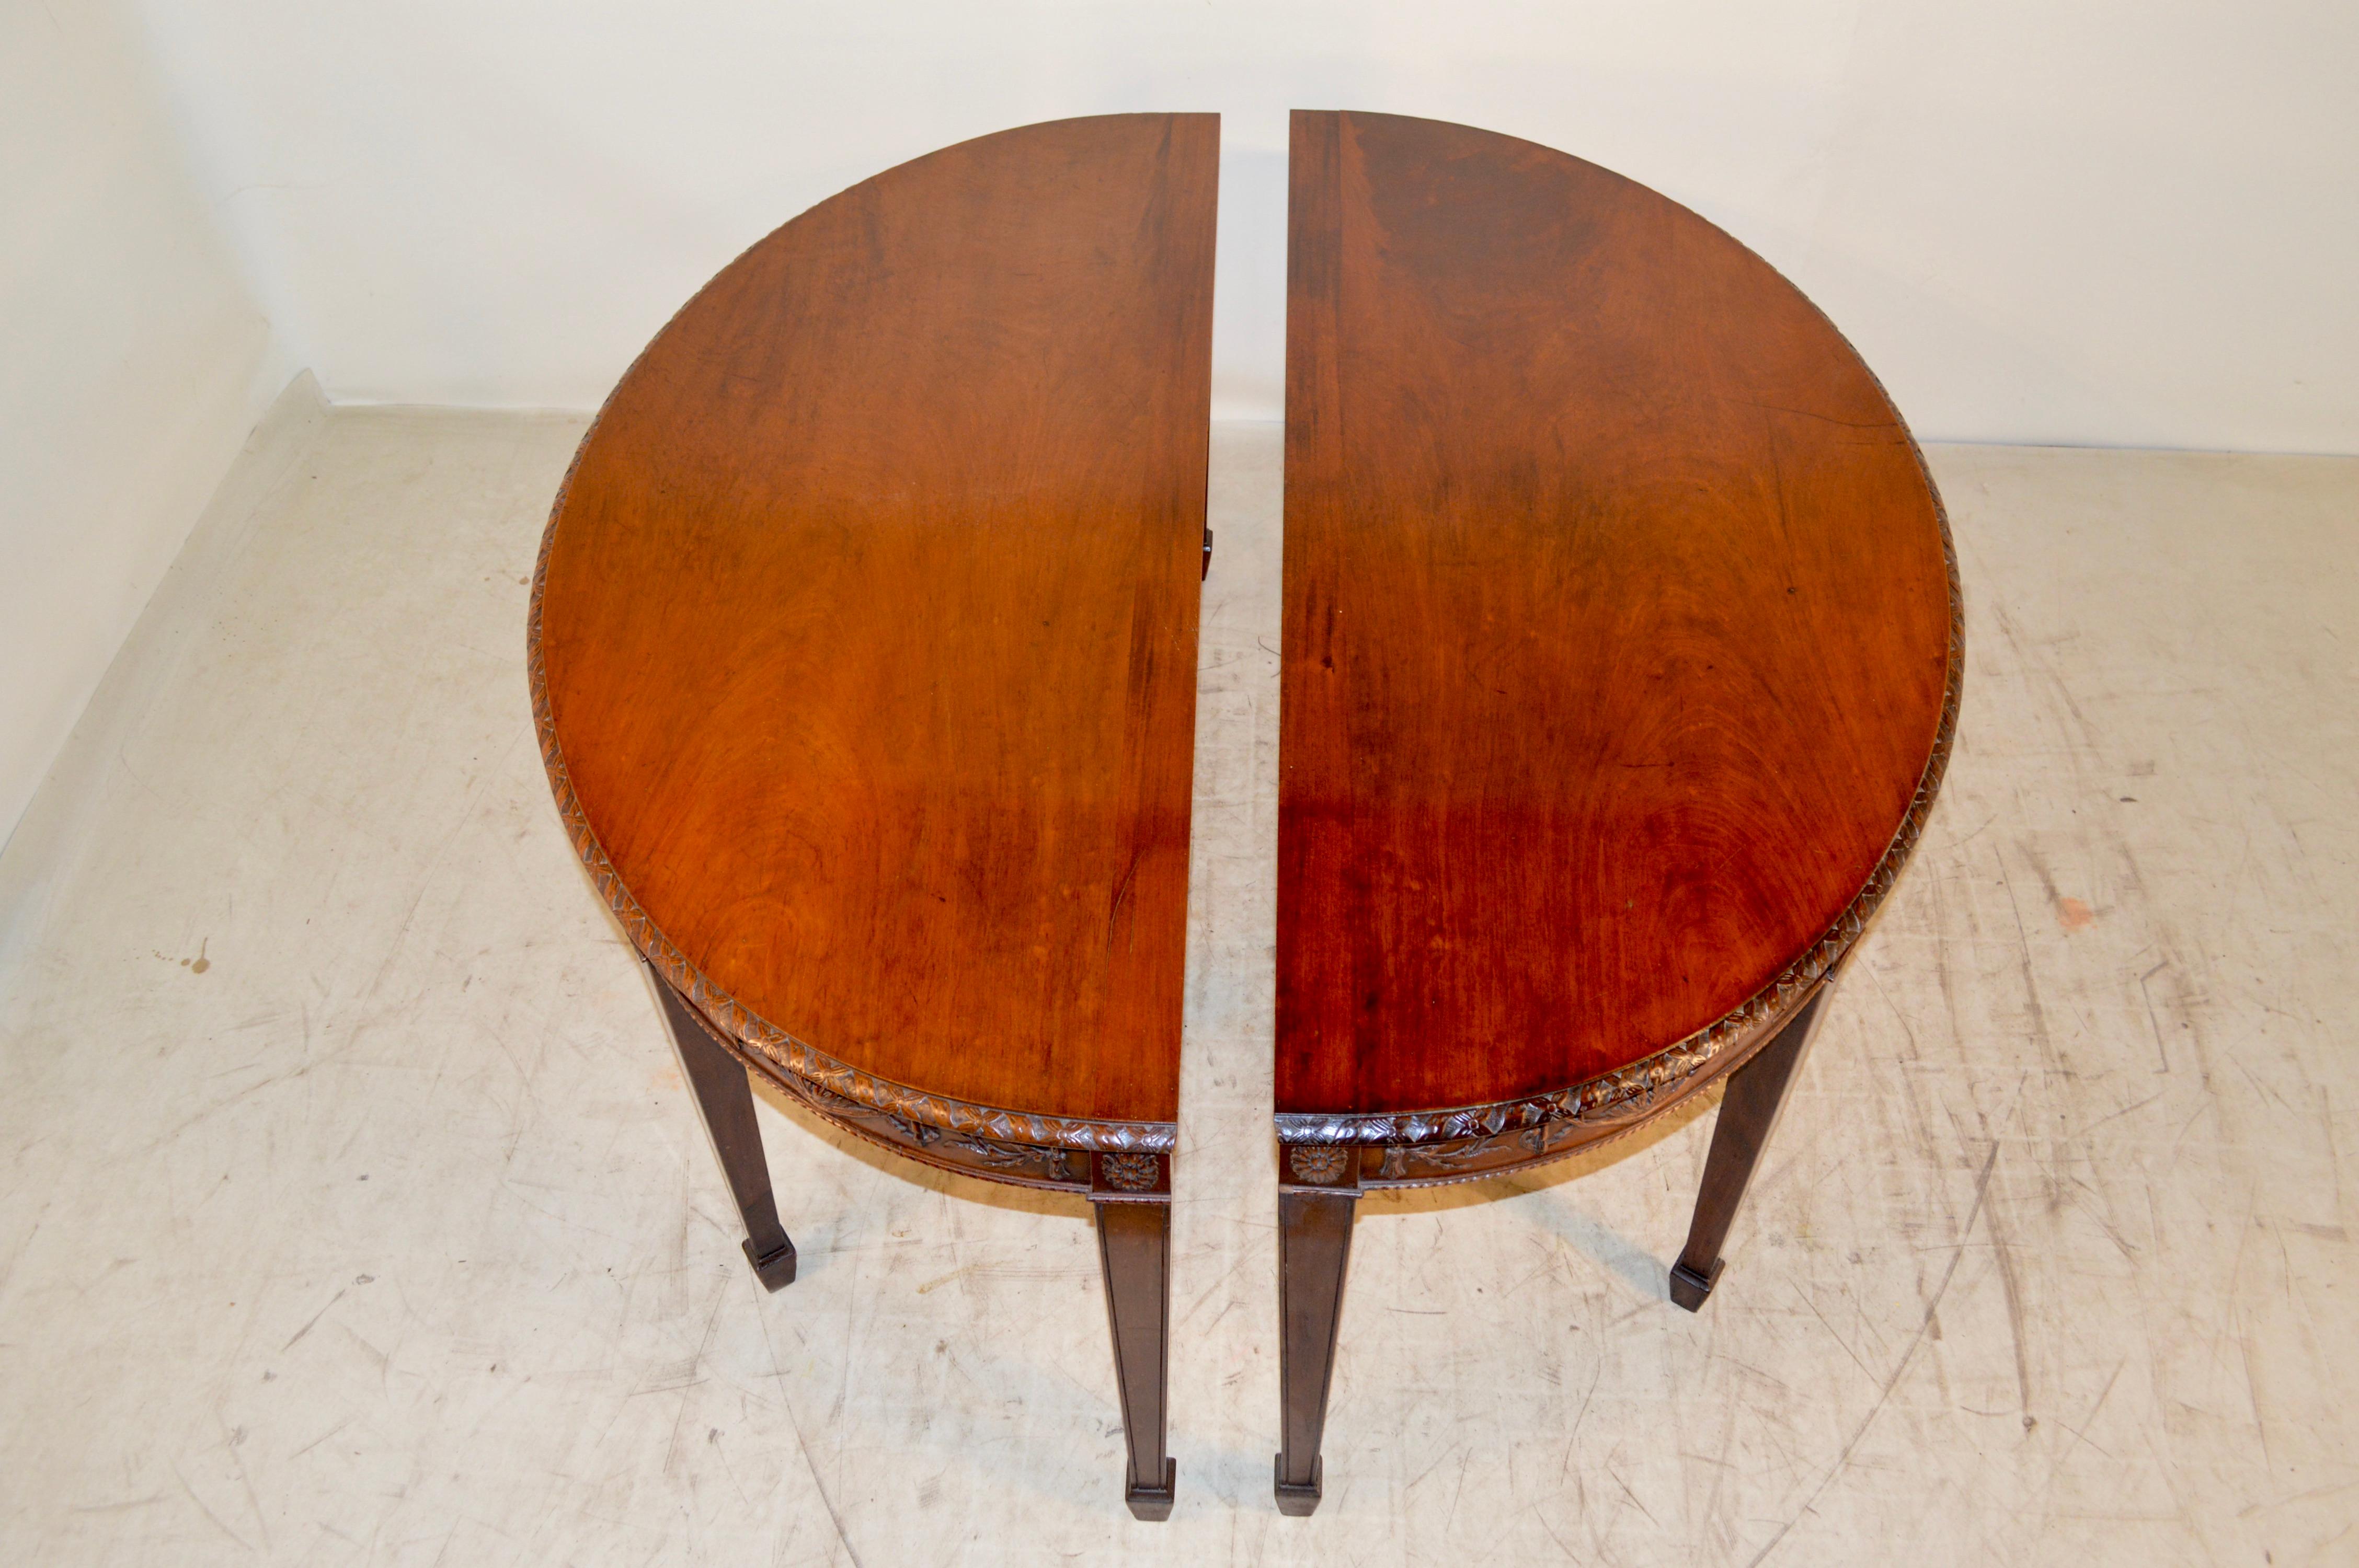 Mahogany Pair of Early 19th Century Demilune Tables For Sale